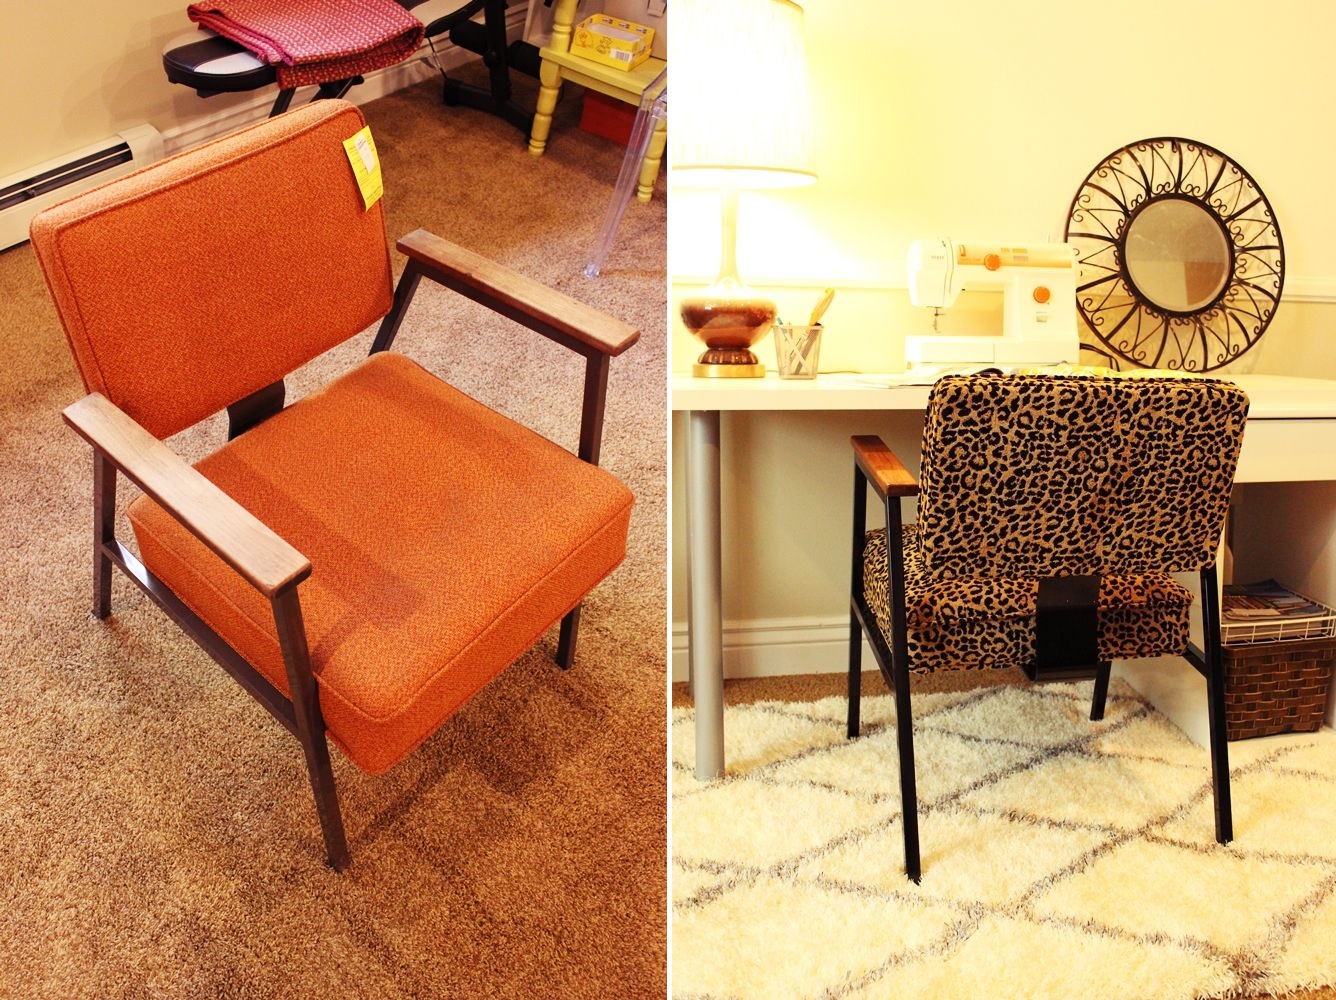 How to Reupholster a Chair From Start to Finish